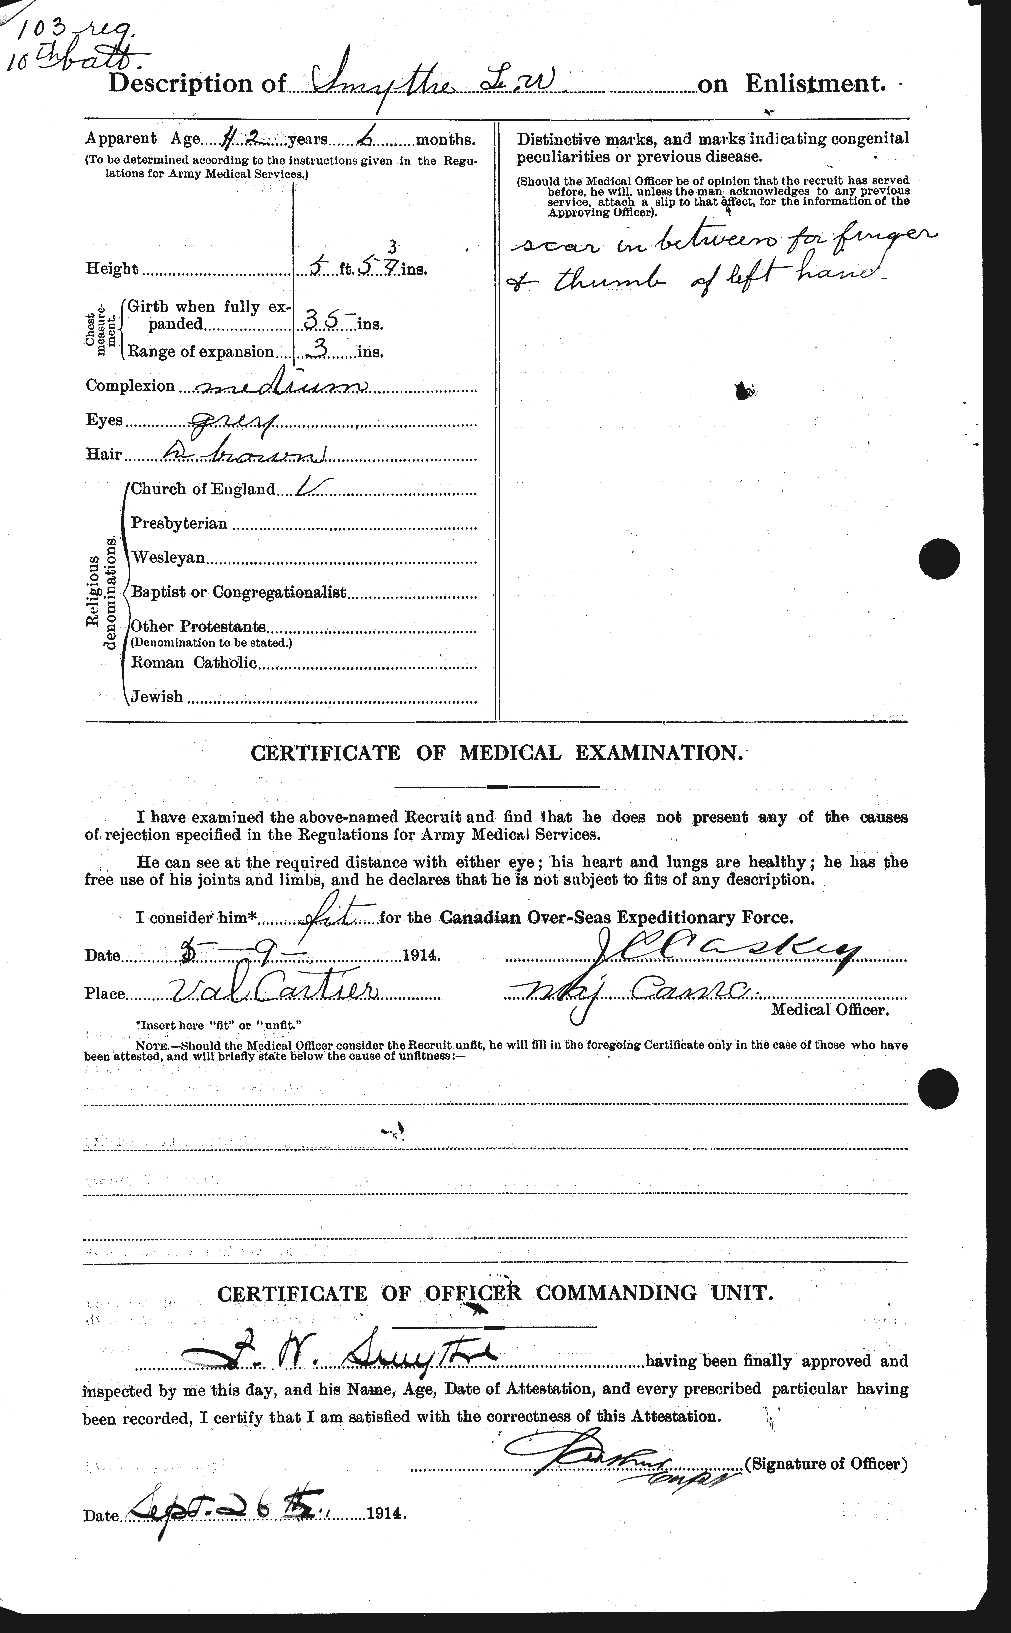 Personnel Records of the First World War - CEF 105567b